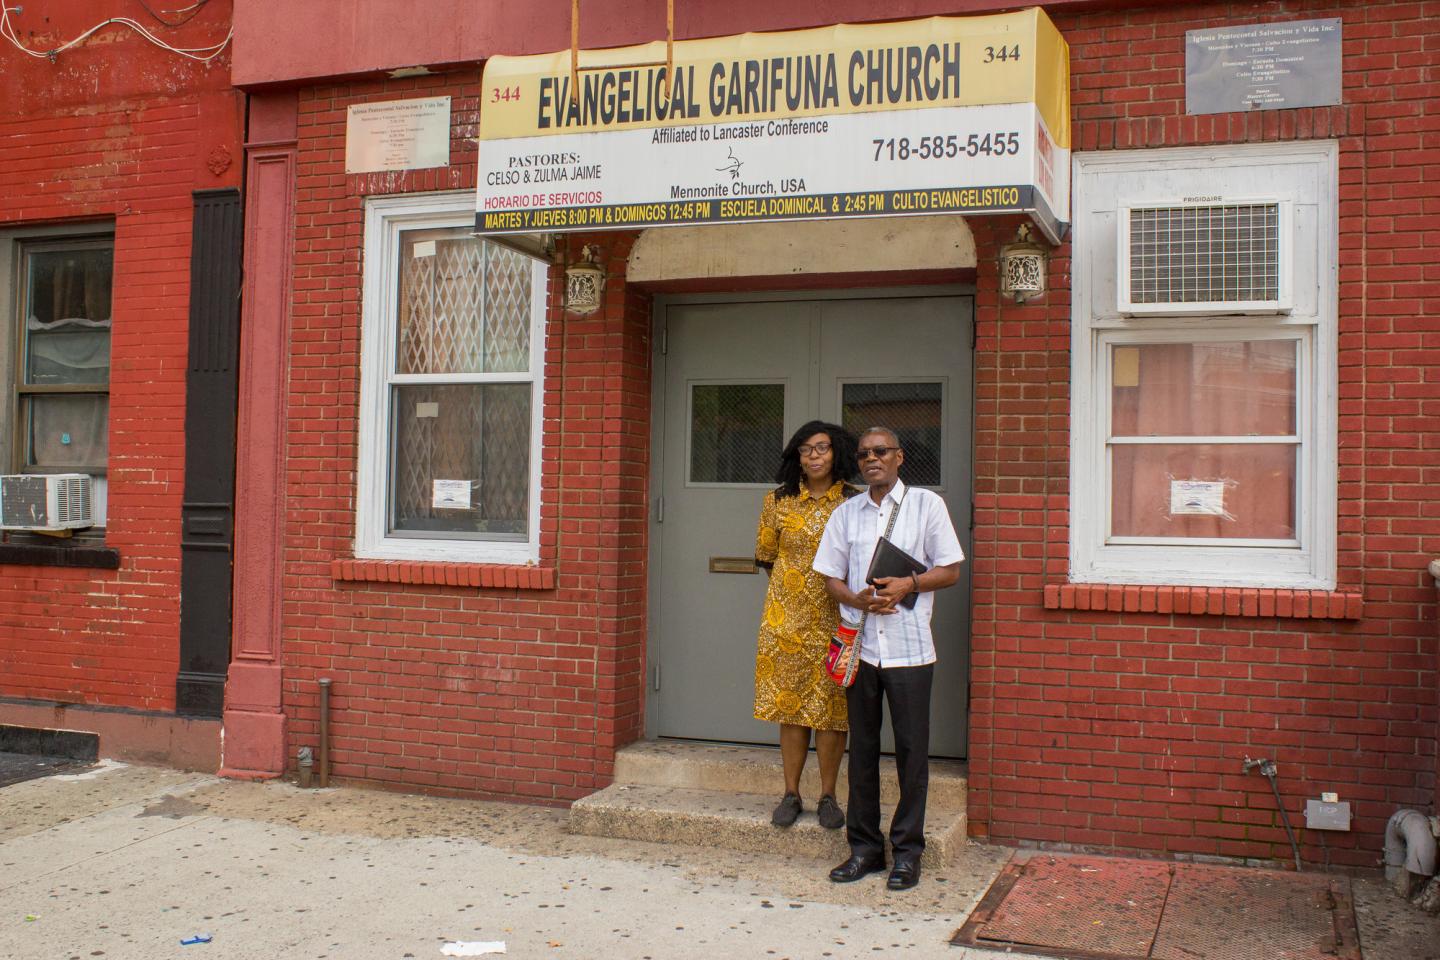 Two people stand by a brick building. The sign on the building reads, "Evangelical Garifuna Church"